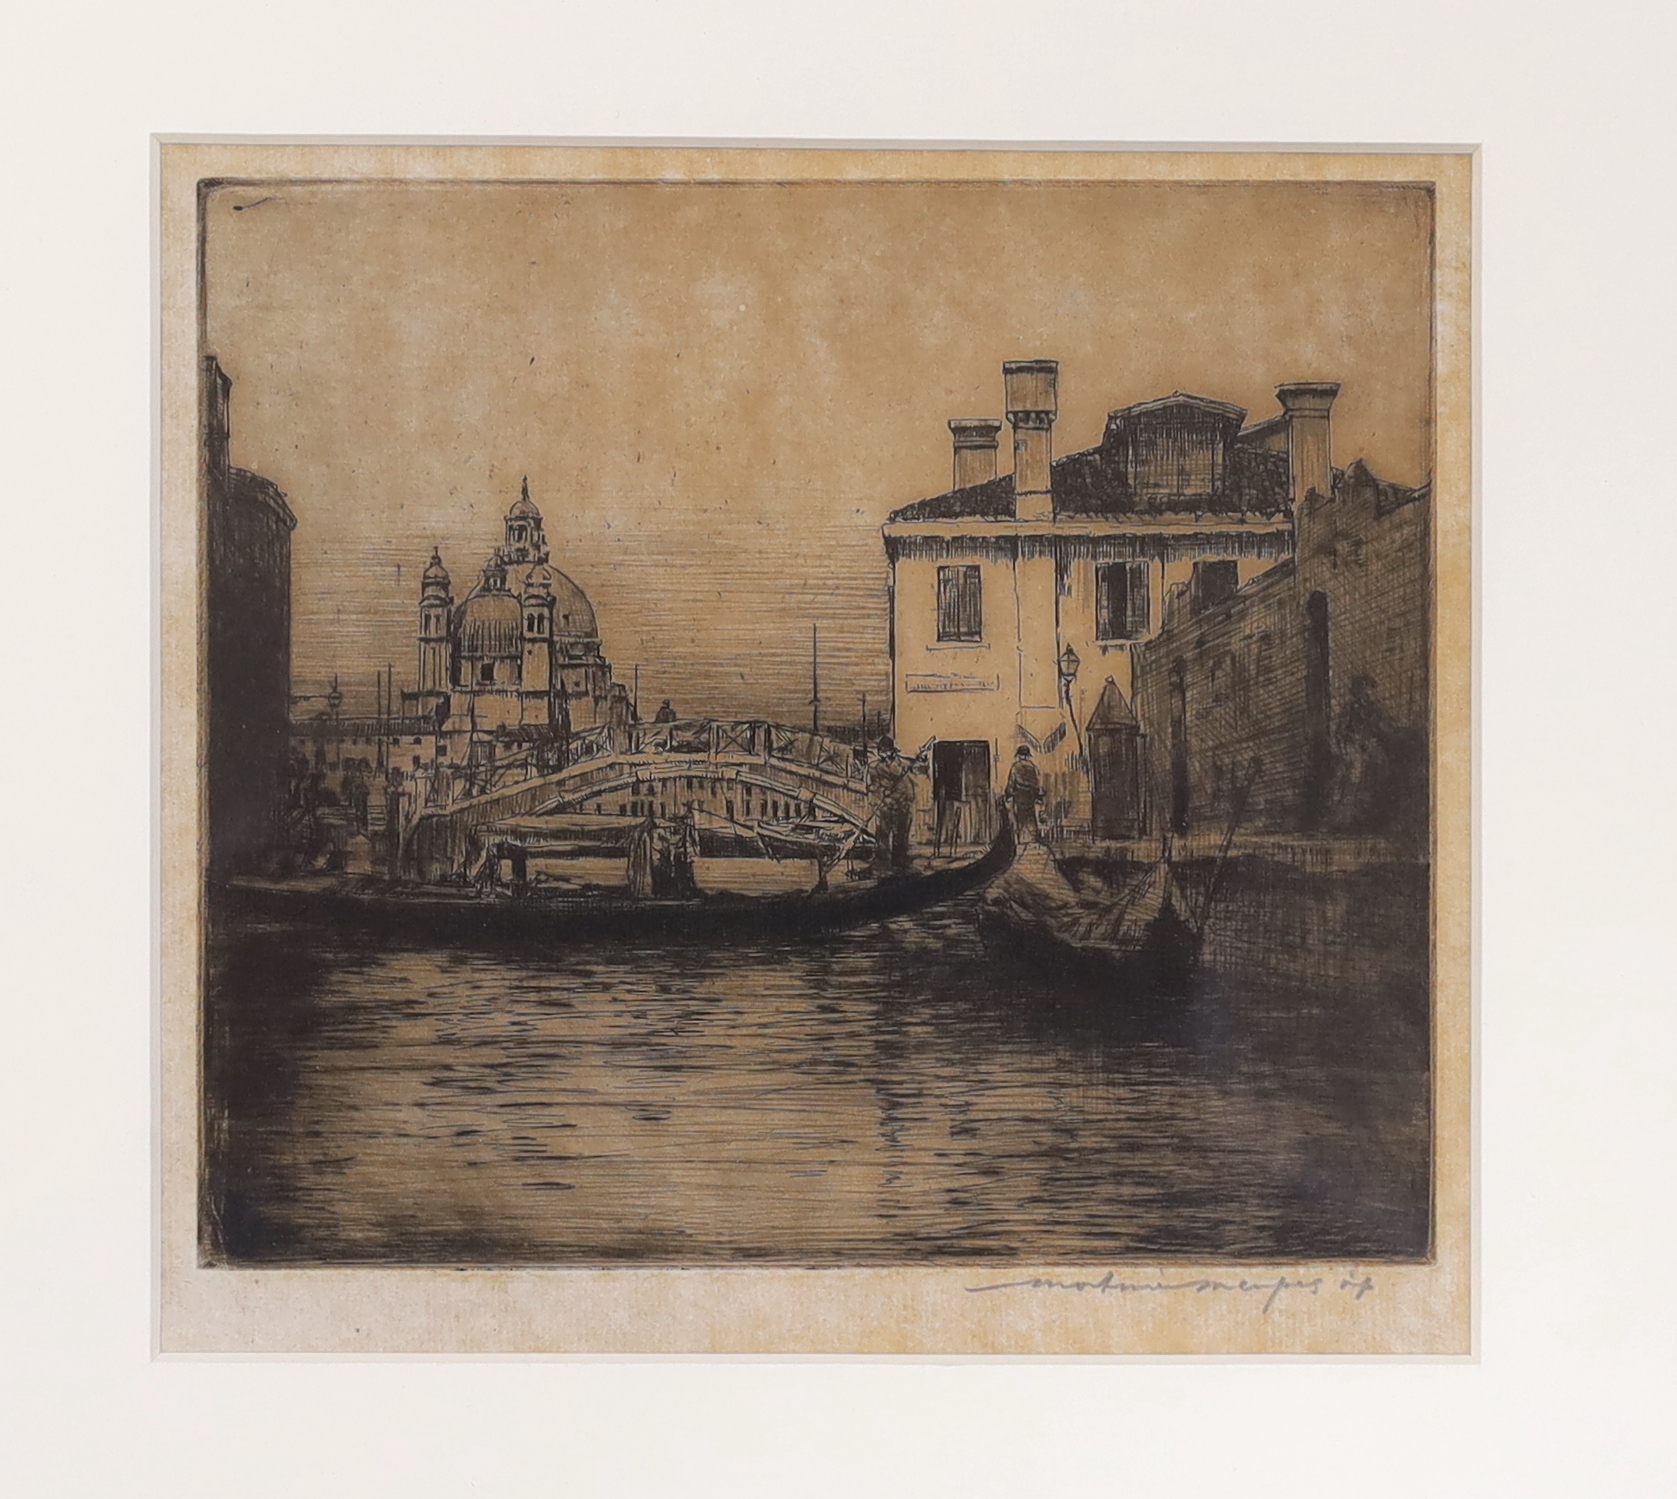 Mortimer Menpes R.E. (Australian, 1855-1938), two pencil signed etchings comprising ‘Rio Chiesa Degli Ognissanti’ and ‘Facades, Venice’, one with Abbott & Holder label verso, largest 16 x 17cm